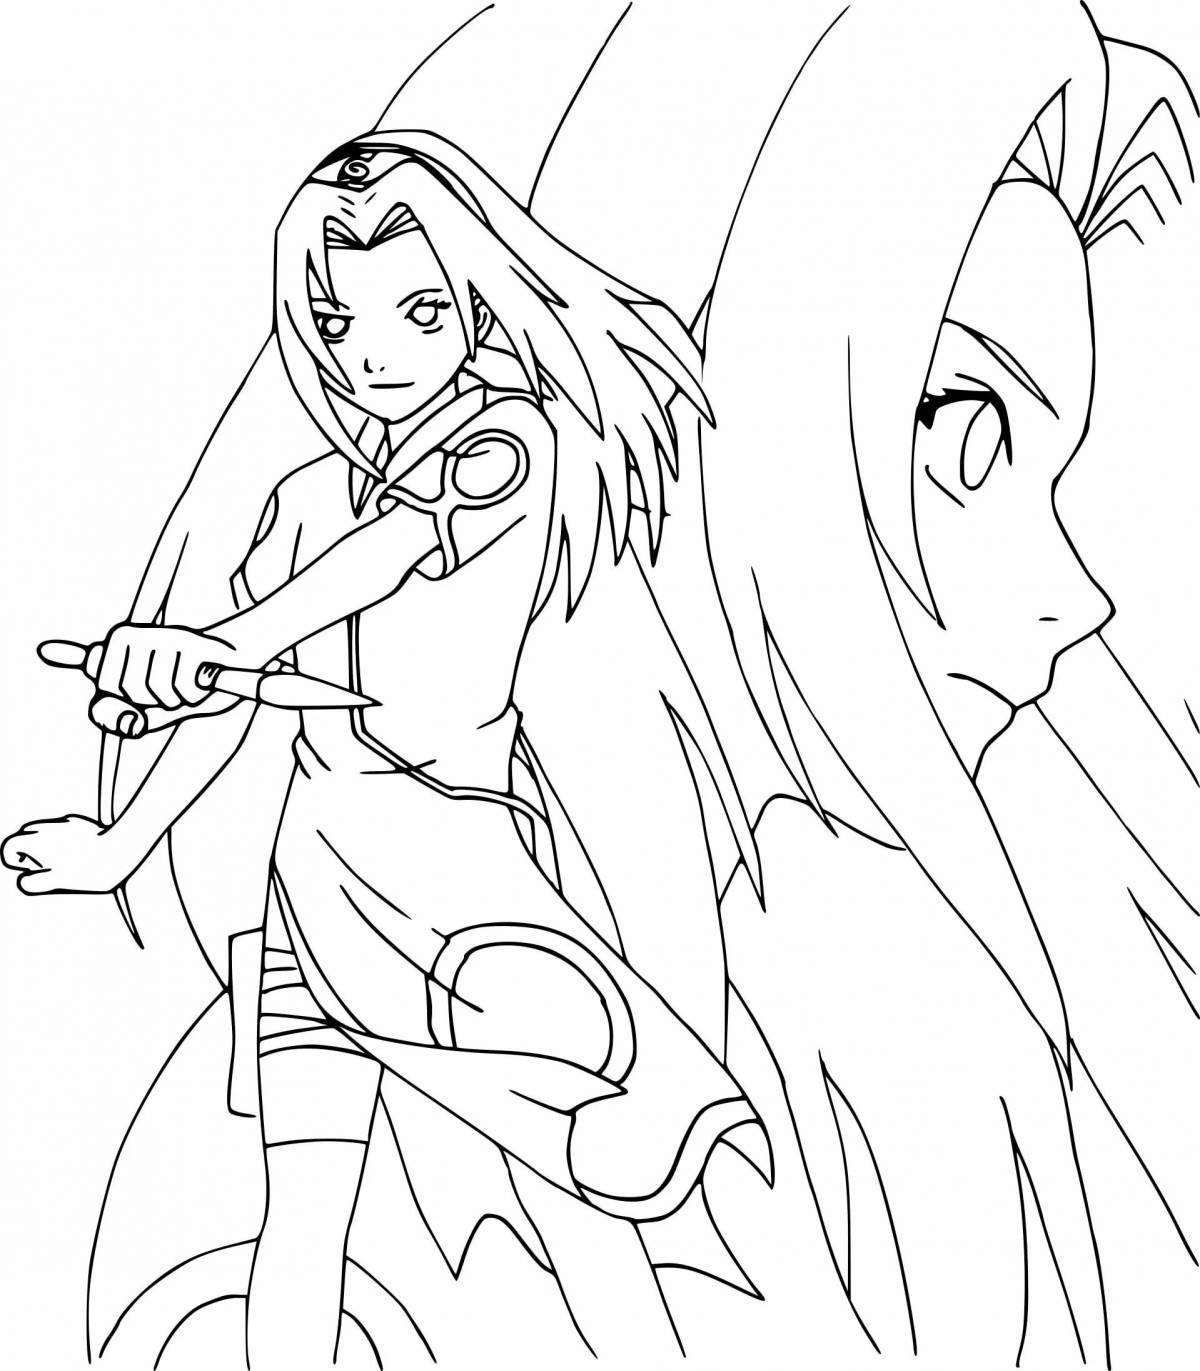 Gorgeous naruto anime coloring book for girls